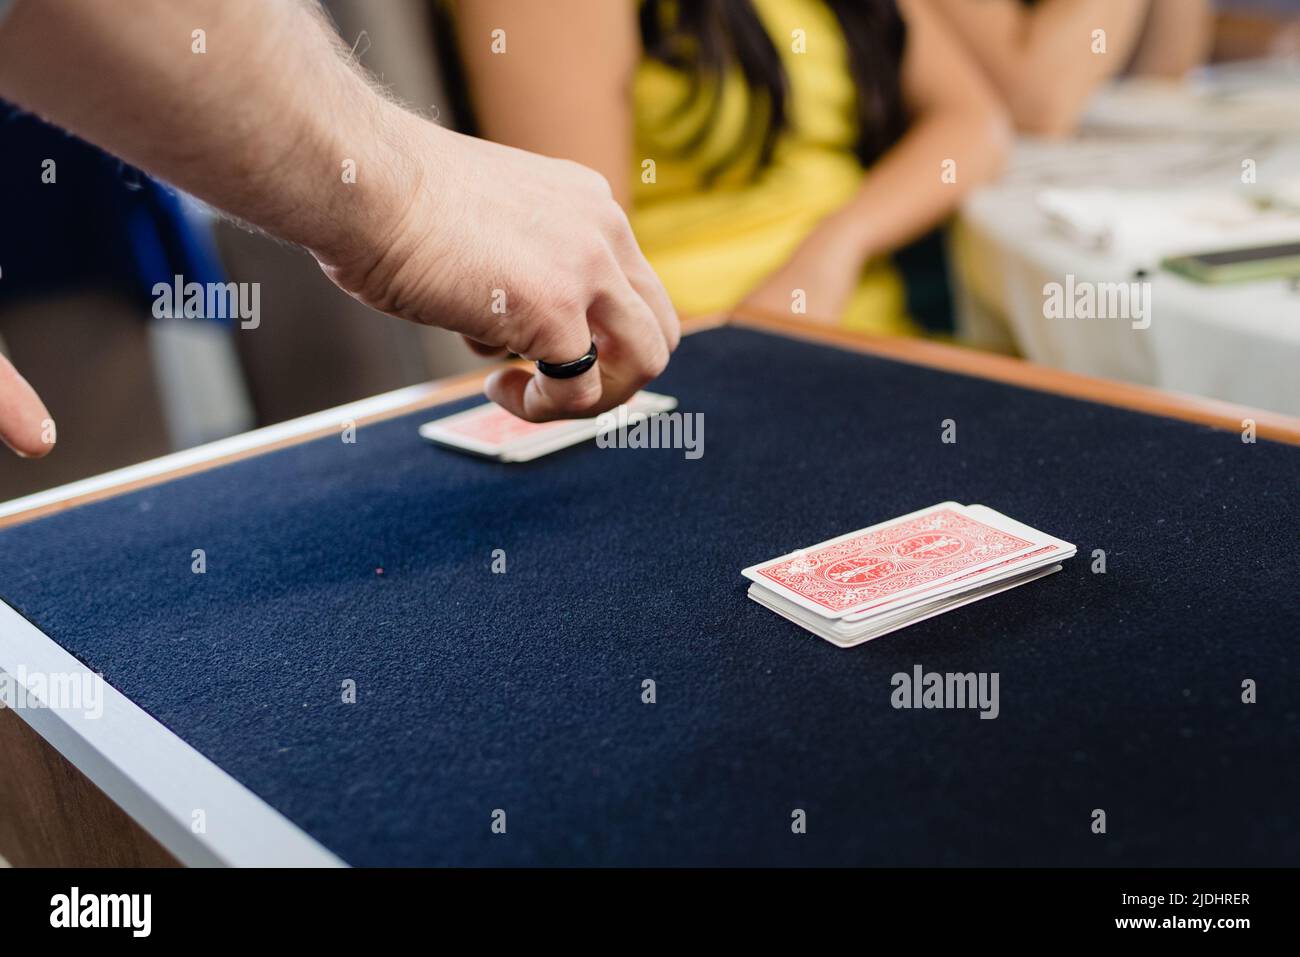 A magician performs a trick with cards face down on a mat. Stock Photo